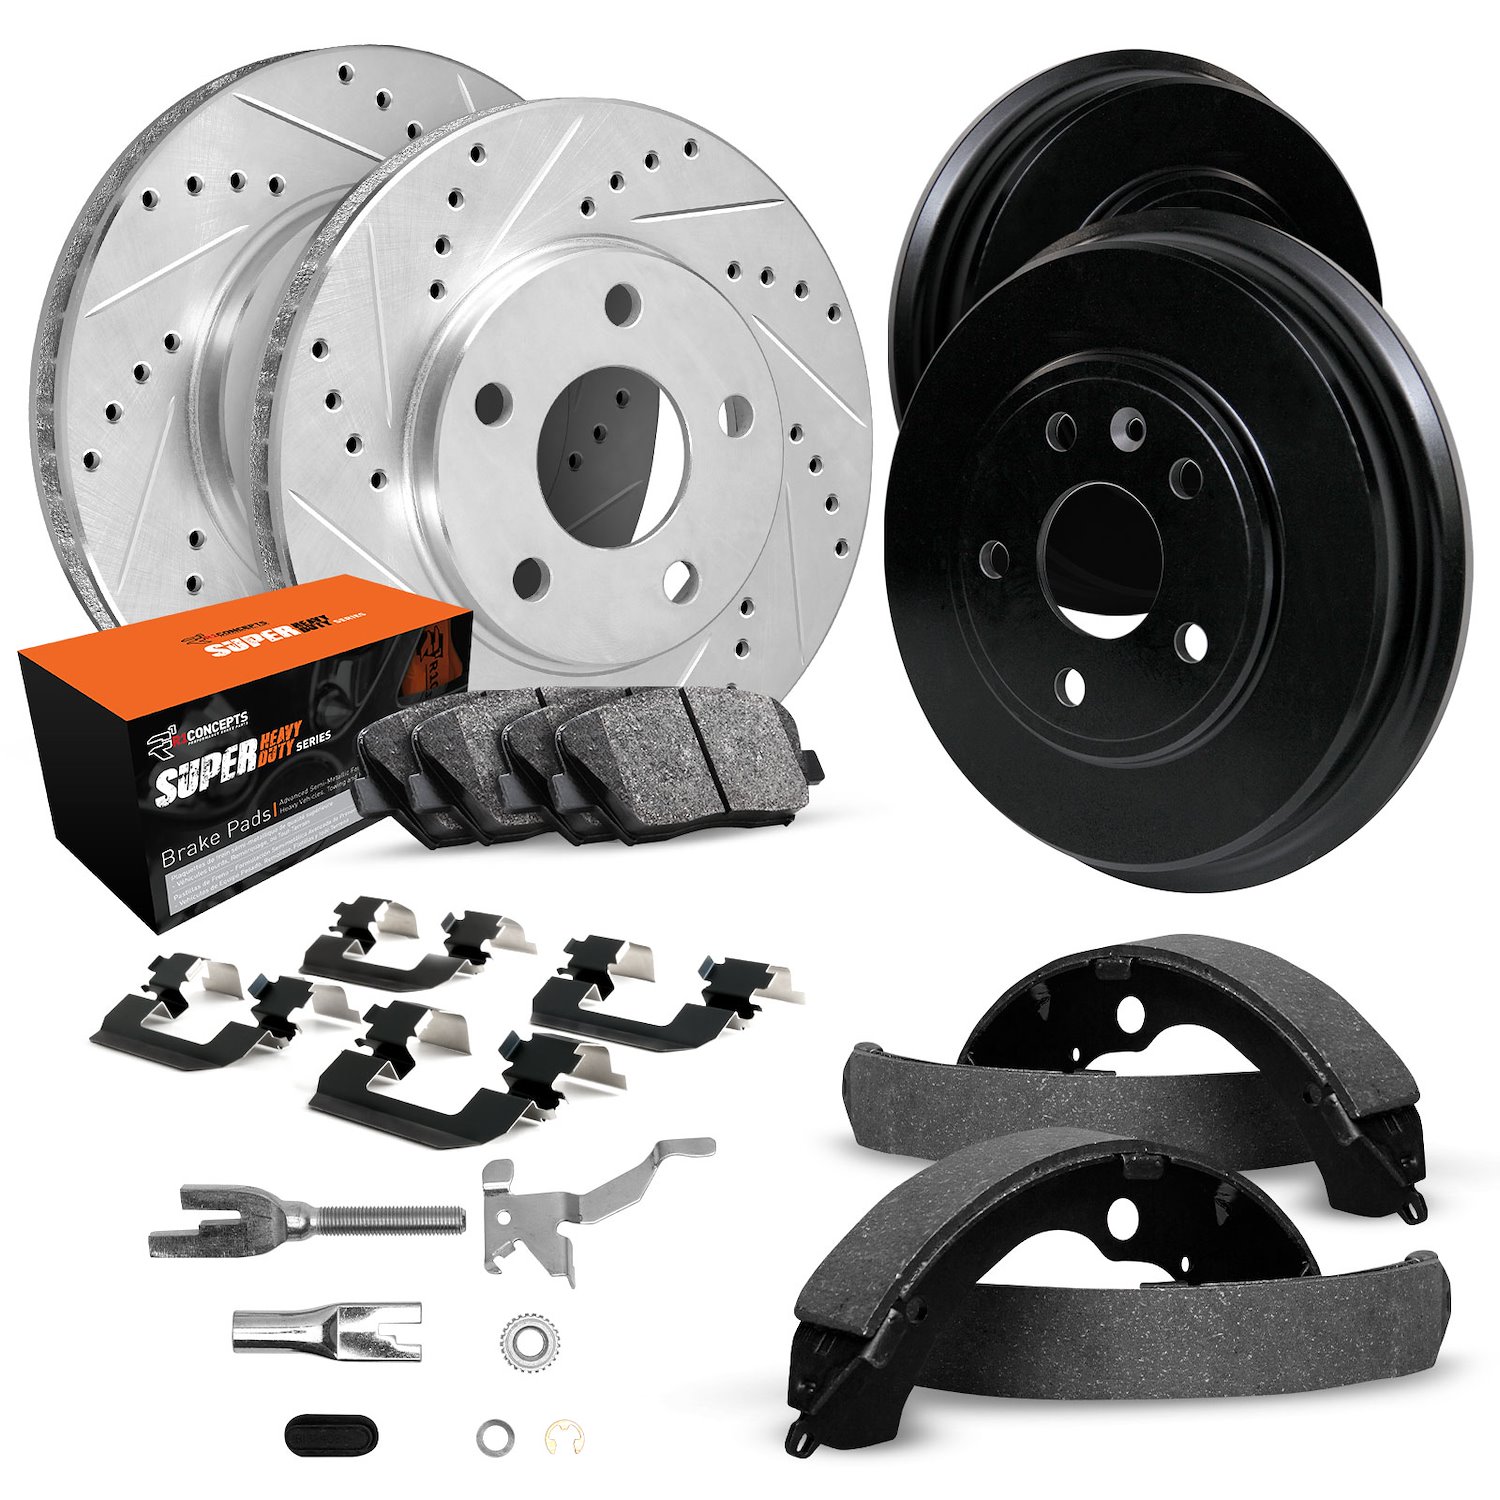 E-Line Drilled/Slotted Silver Rotor & Drum Set w/Super-Duty Pads, Shoes/Hardware/Adjusters, 1986-1989 Mopar